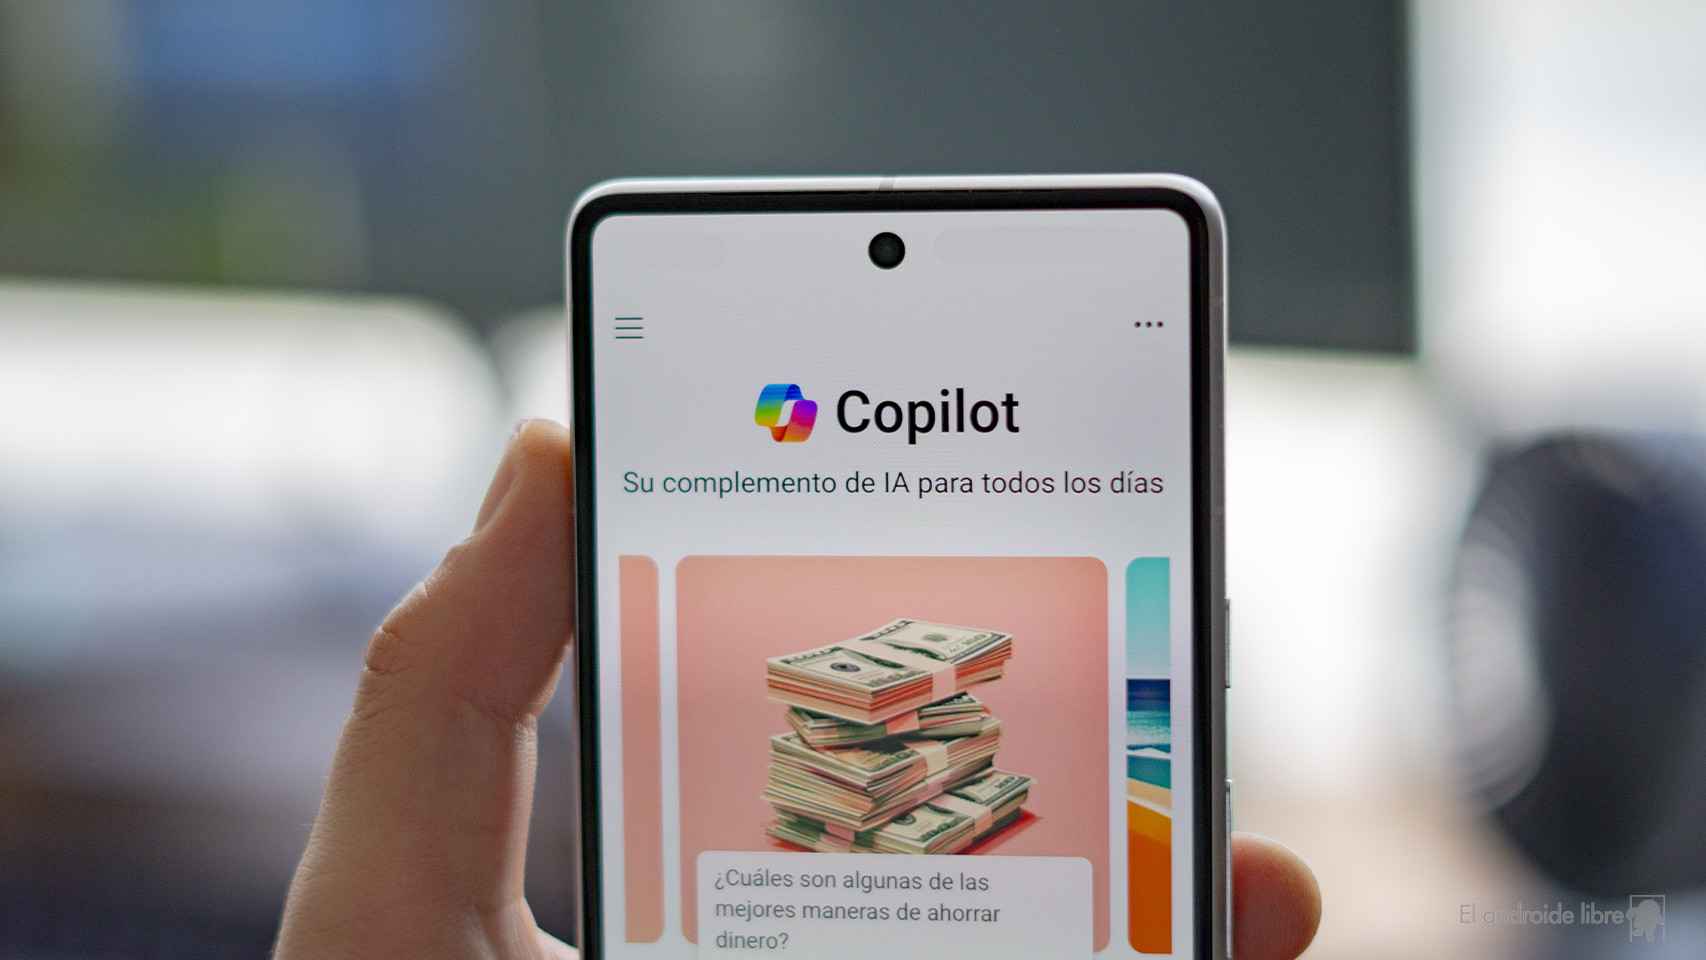 The 4 most interesting features of Microsoft Copilot that you should use every day on your mobile phone